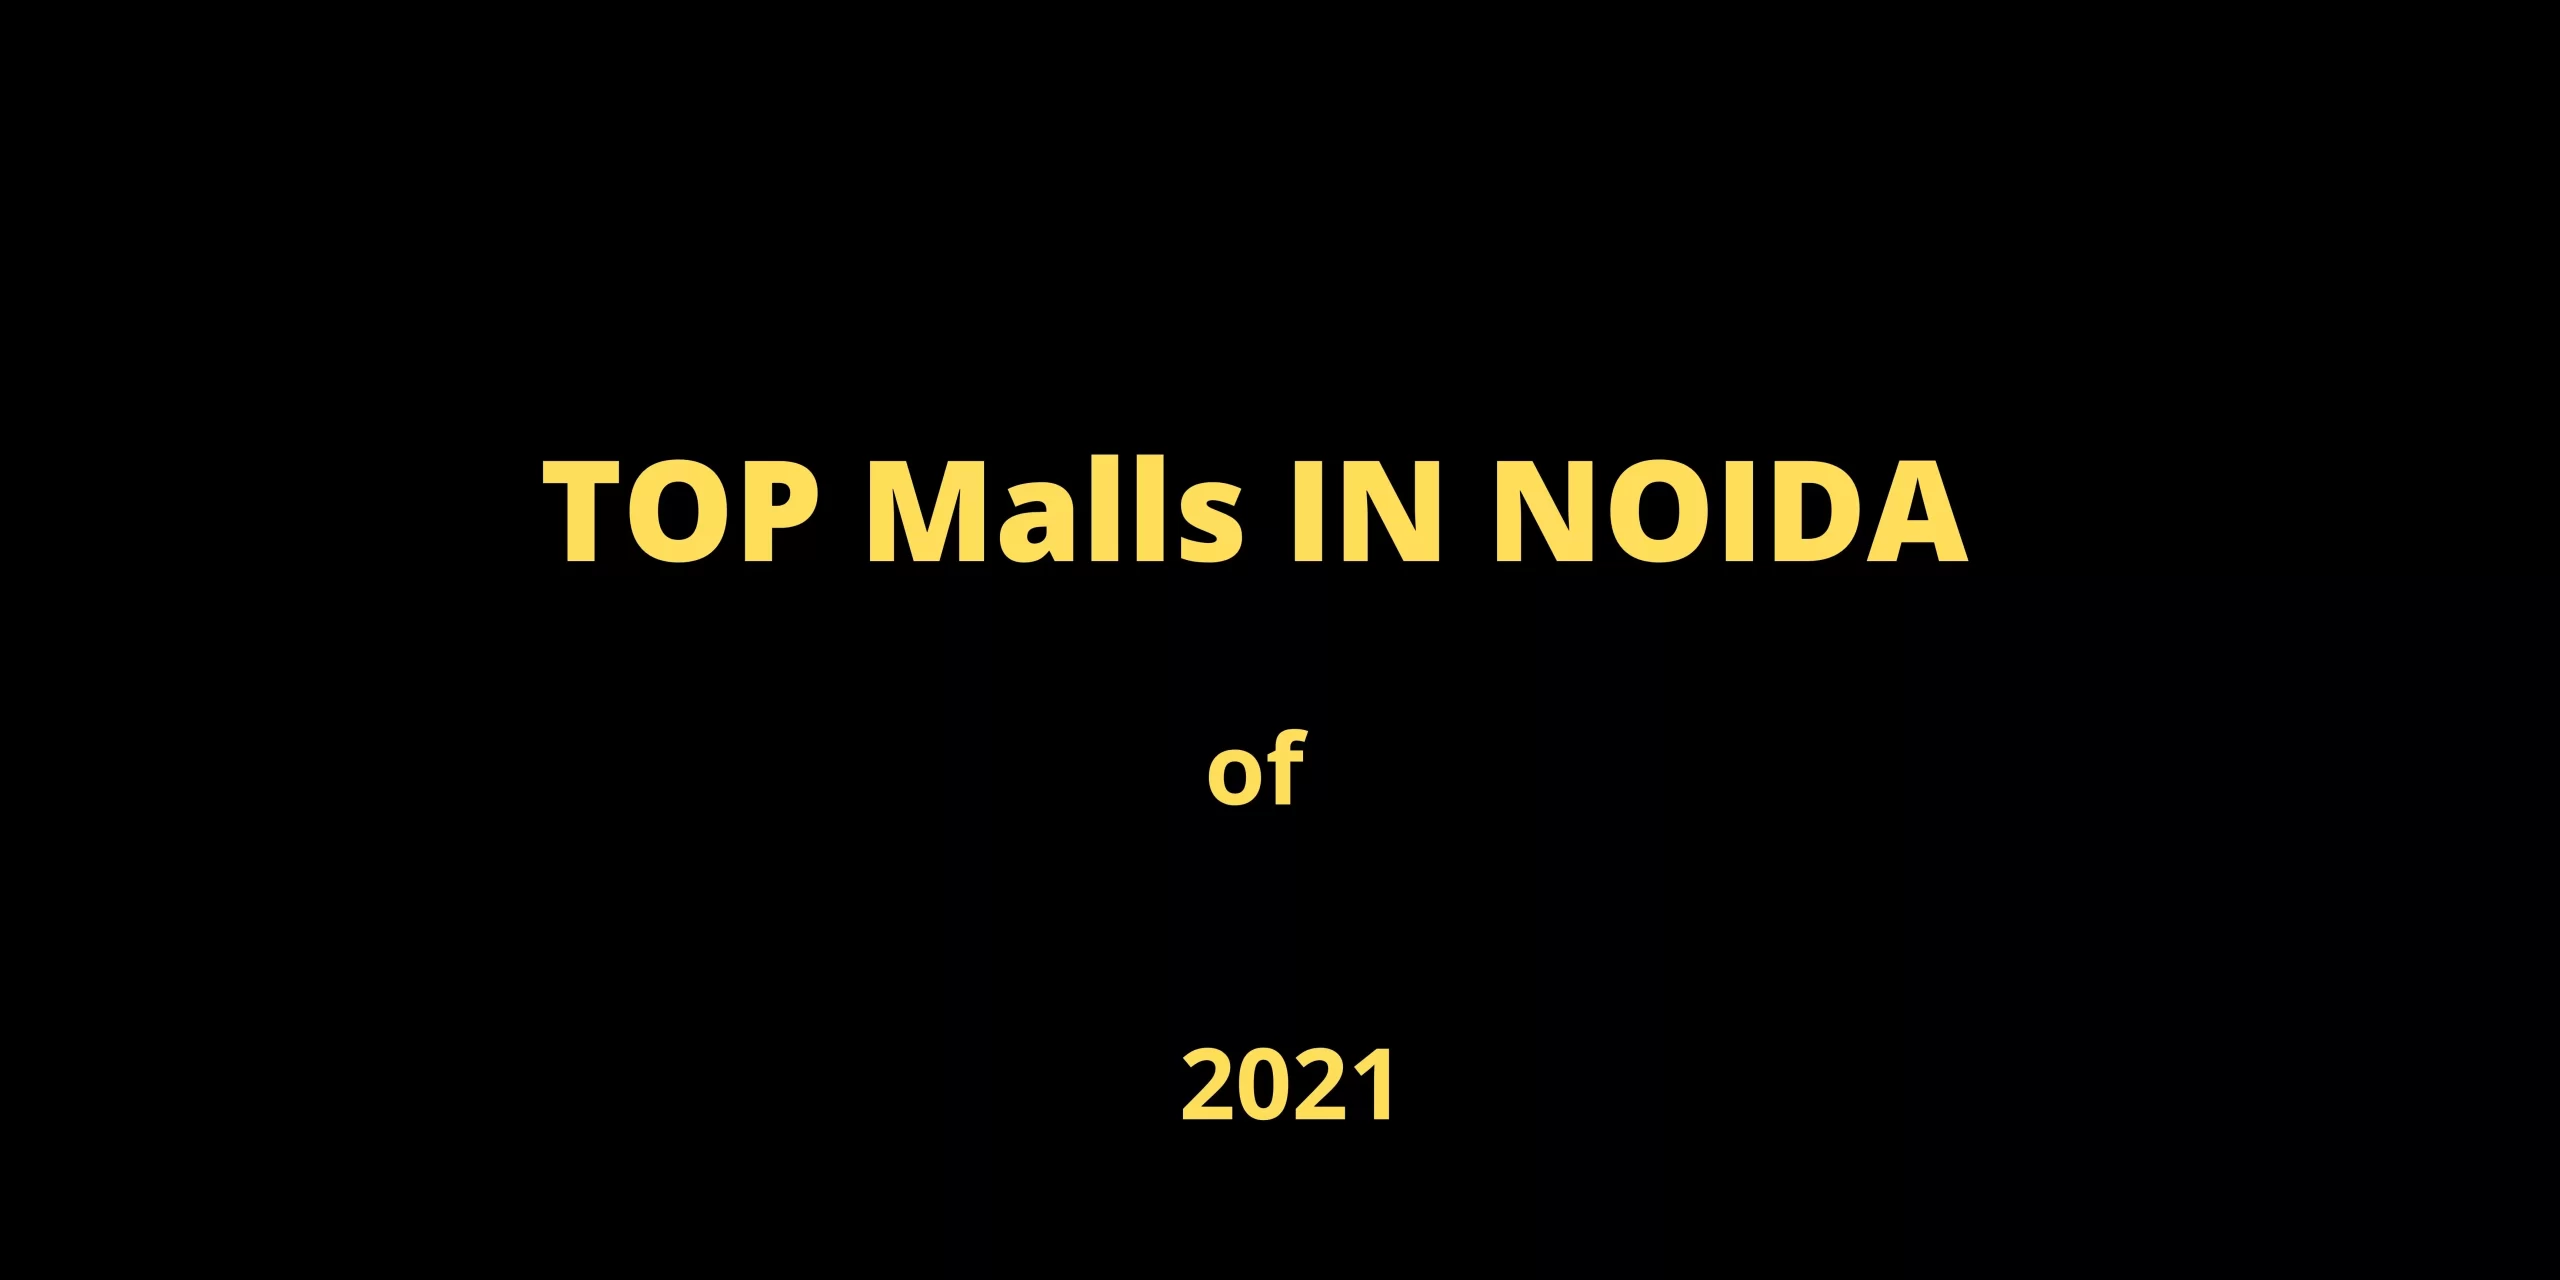 Top 5 Malls in Noida to visit in 2021